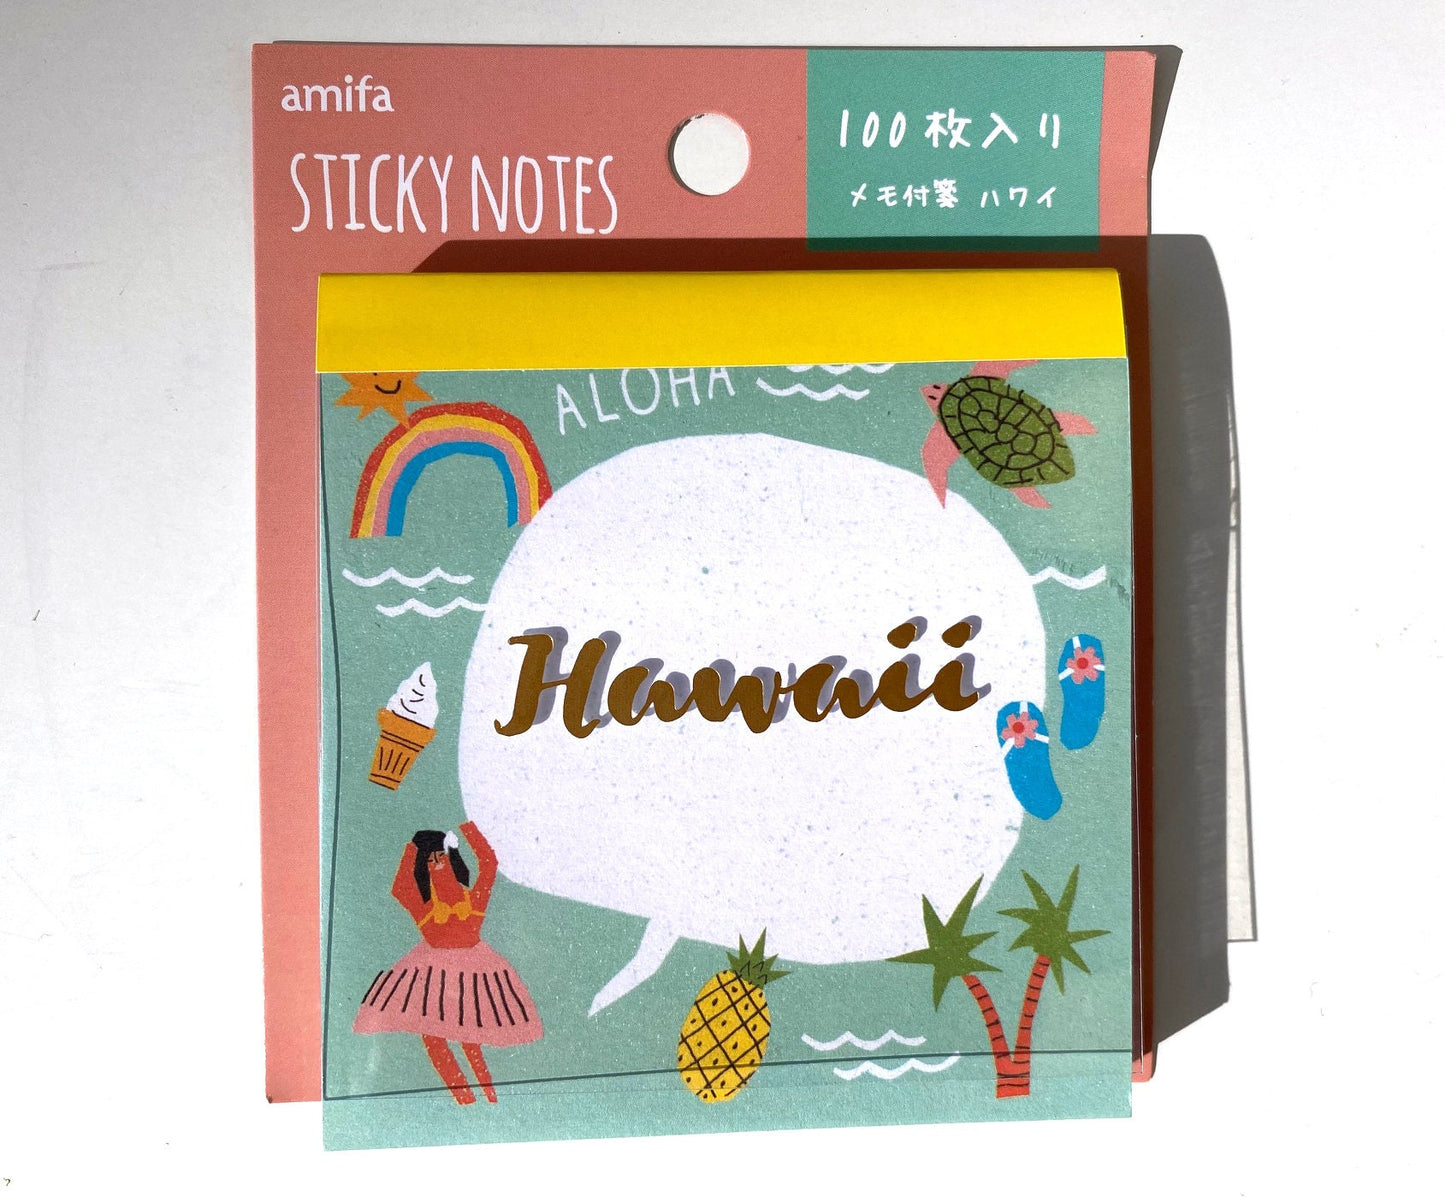 Hawaii  Sticky notes - Memo - Stickers